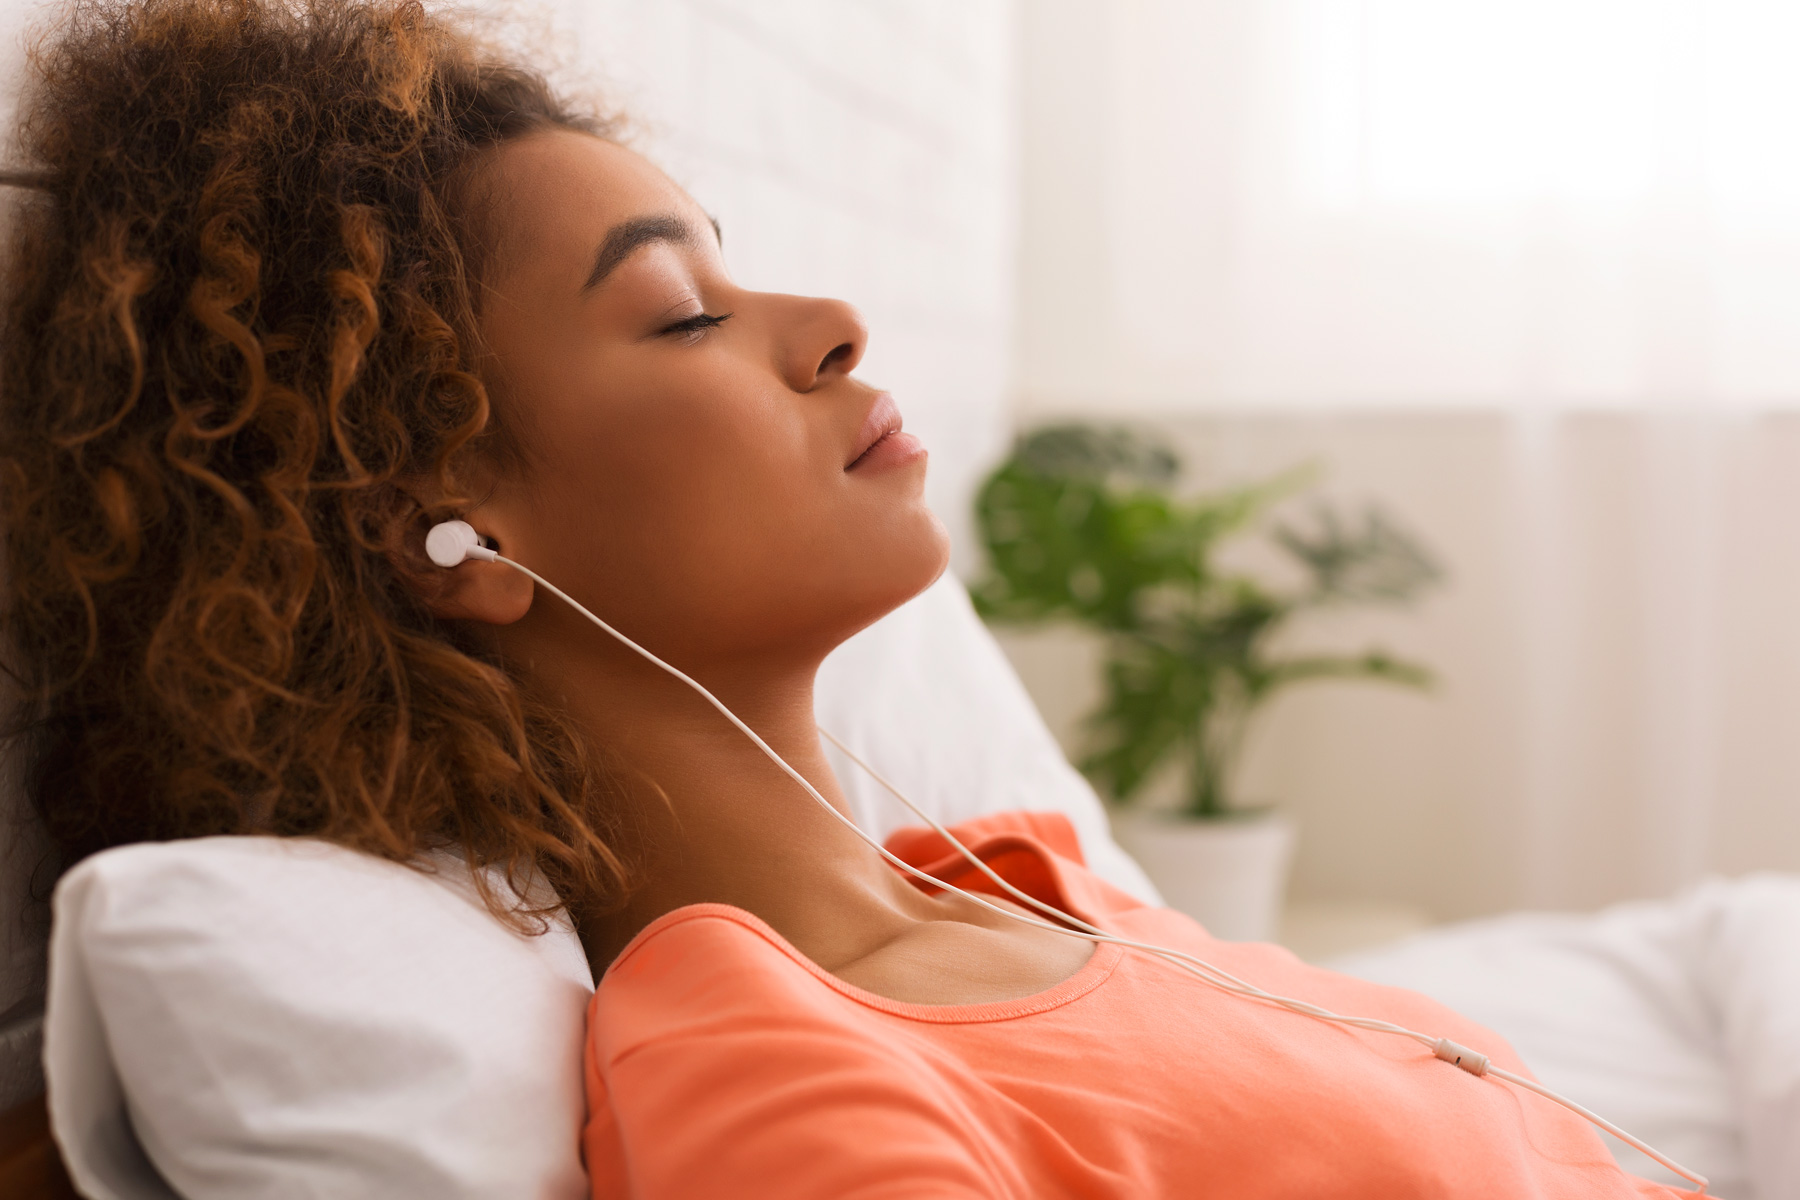 Music Could Be a Post-Op Panacea, Study Finds